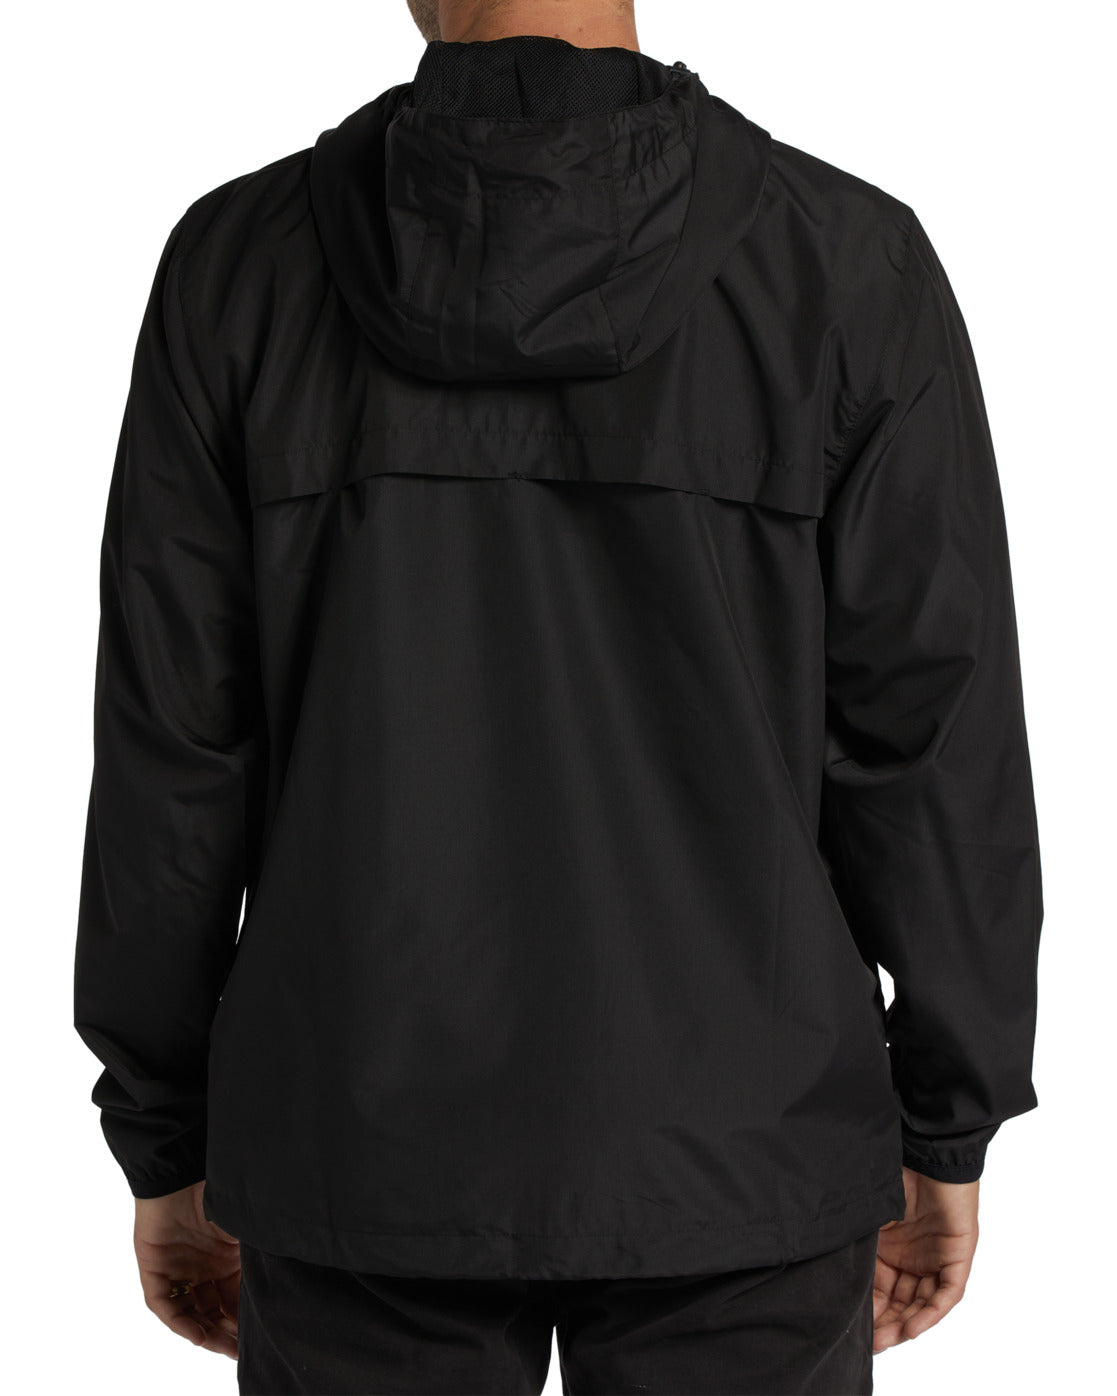 Windcheater Jackets for men: Defy the Wind and Rain: With Top 10  Windcheater Jackets for Men in India - The Economic Times